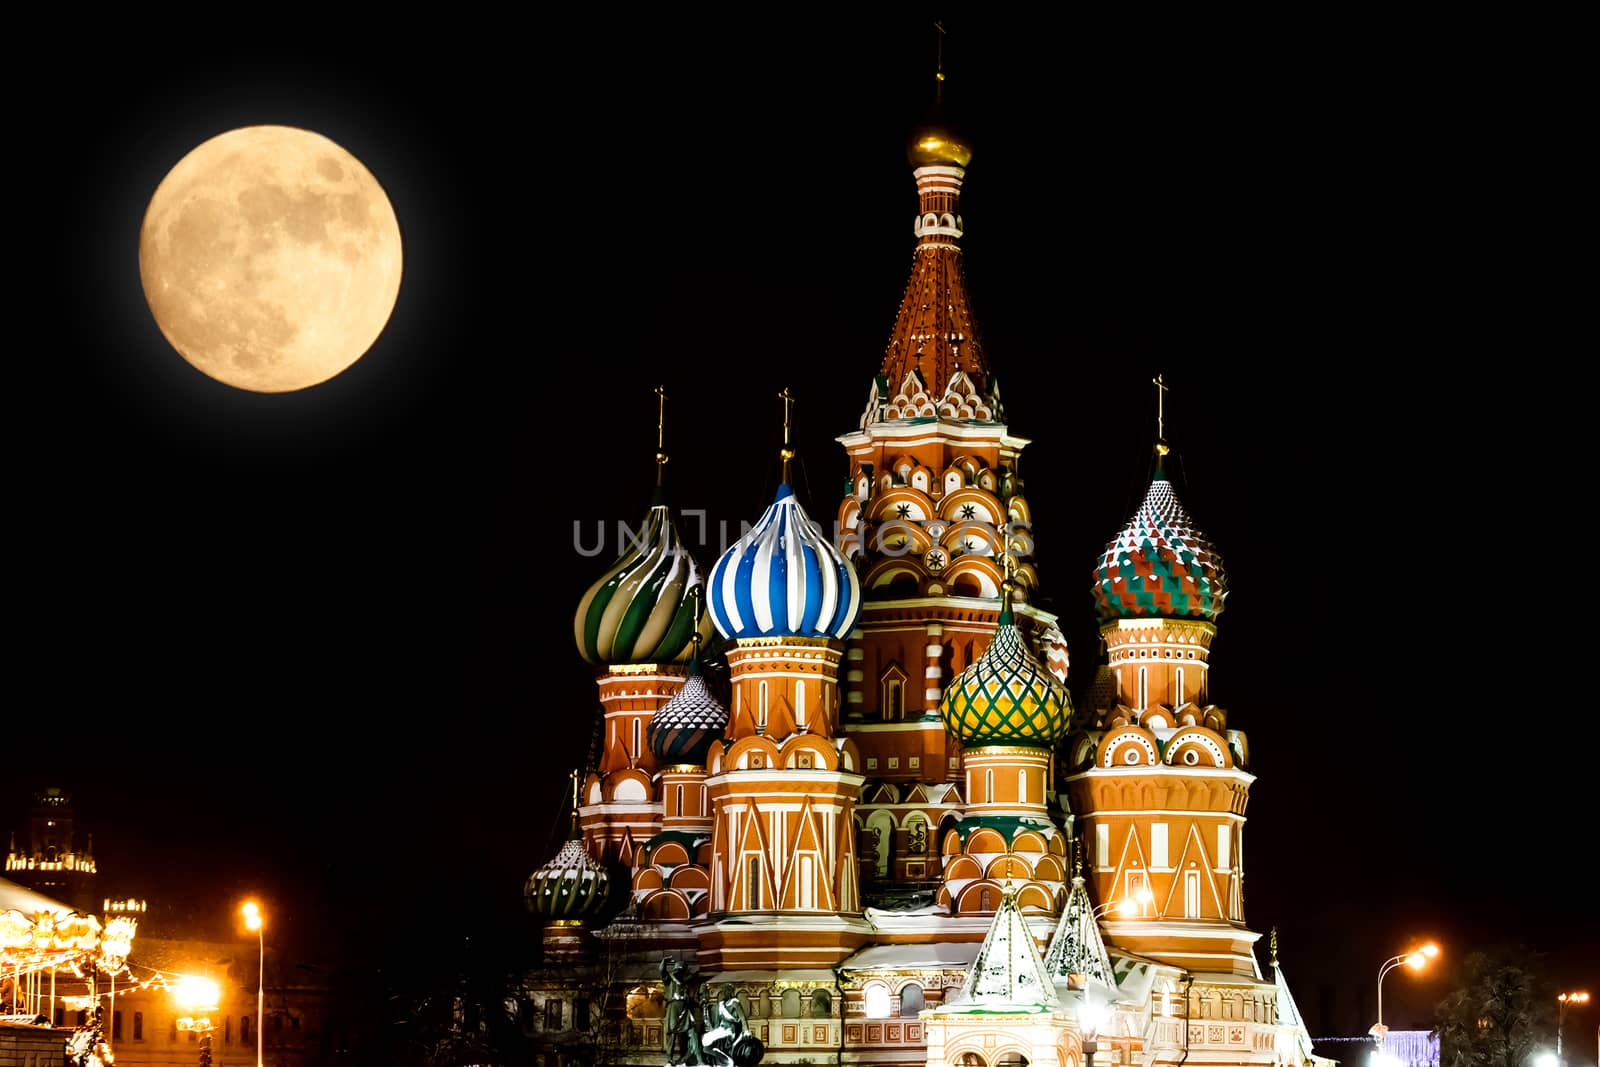 St Basils Cathedral at night and full Moon. Winter season. Mosco by Nobilior